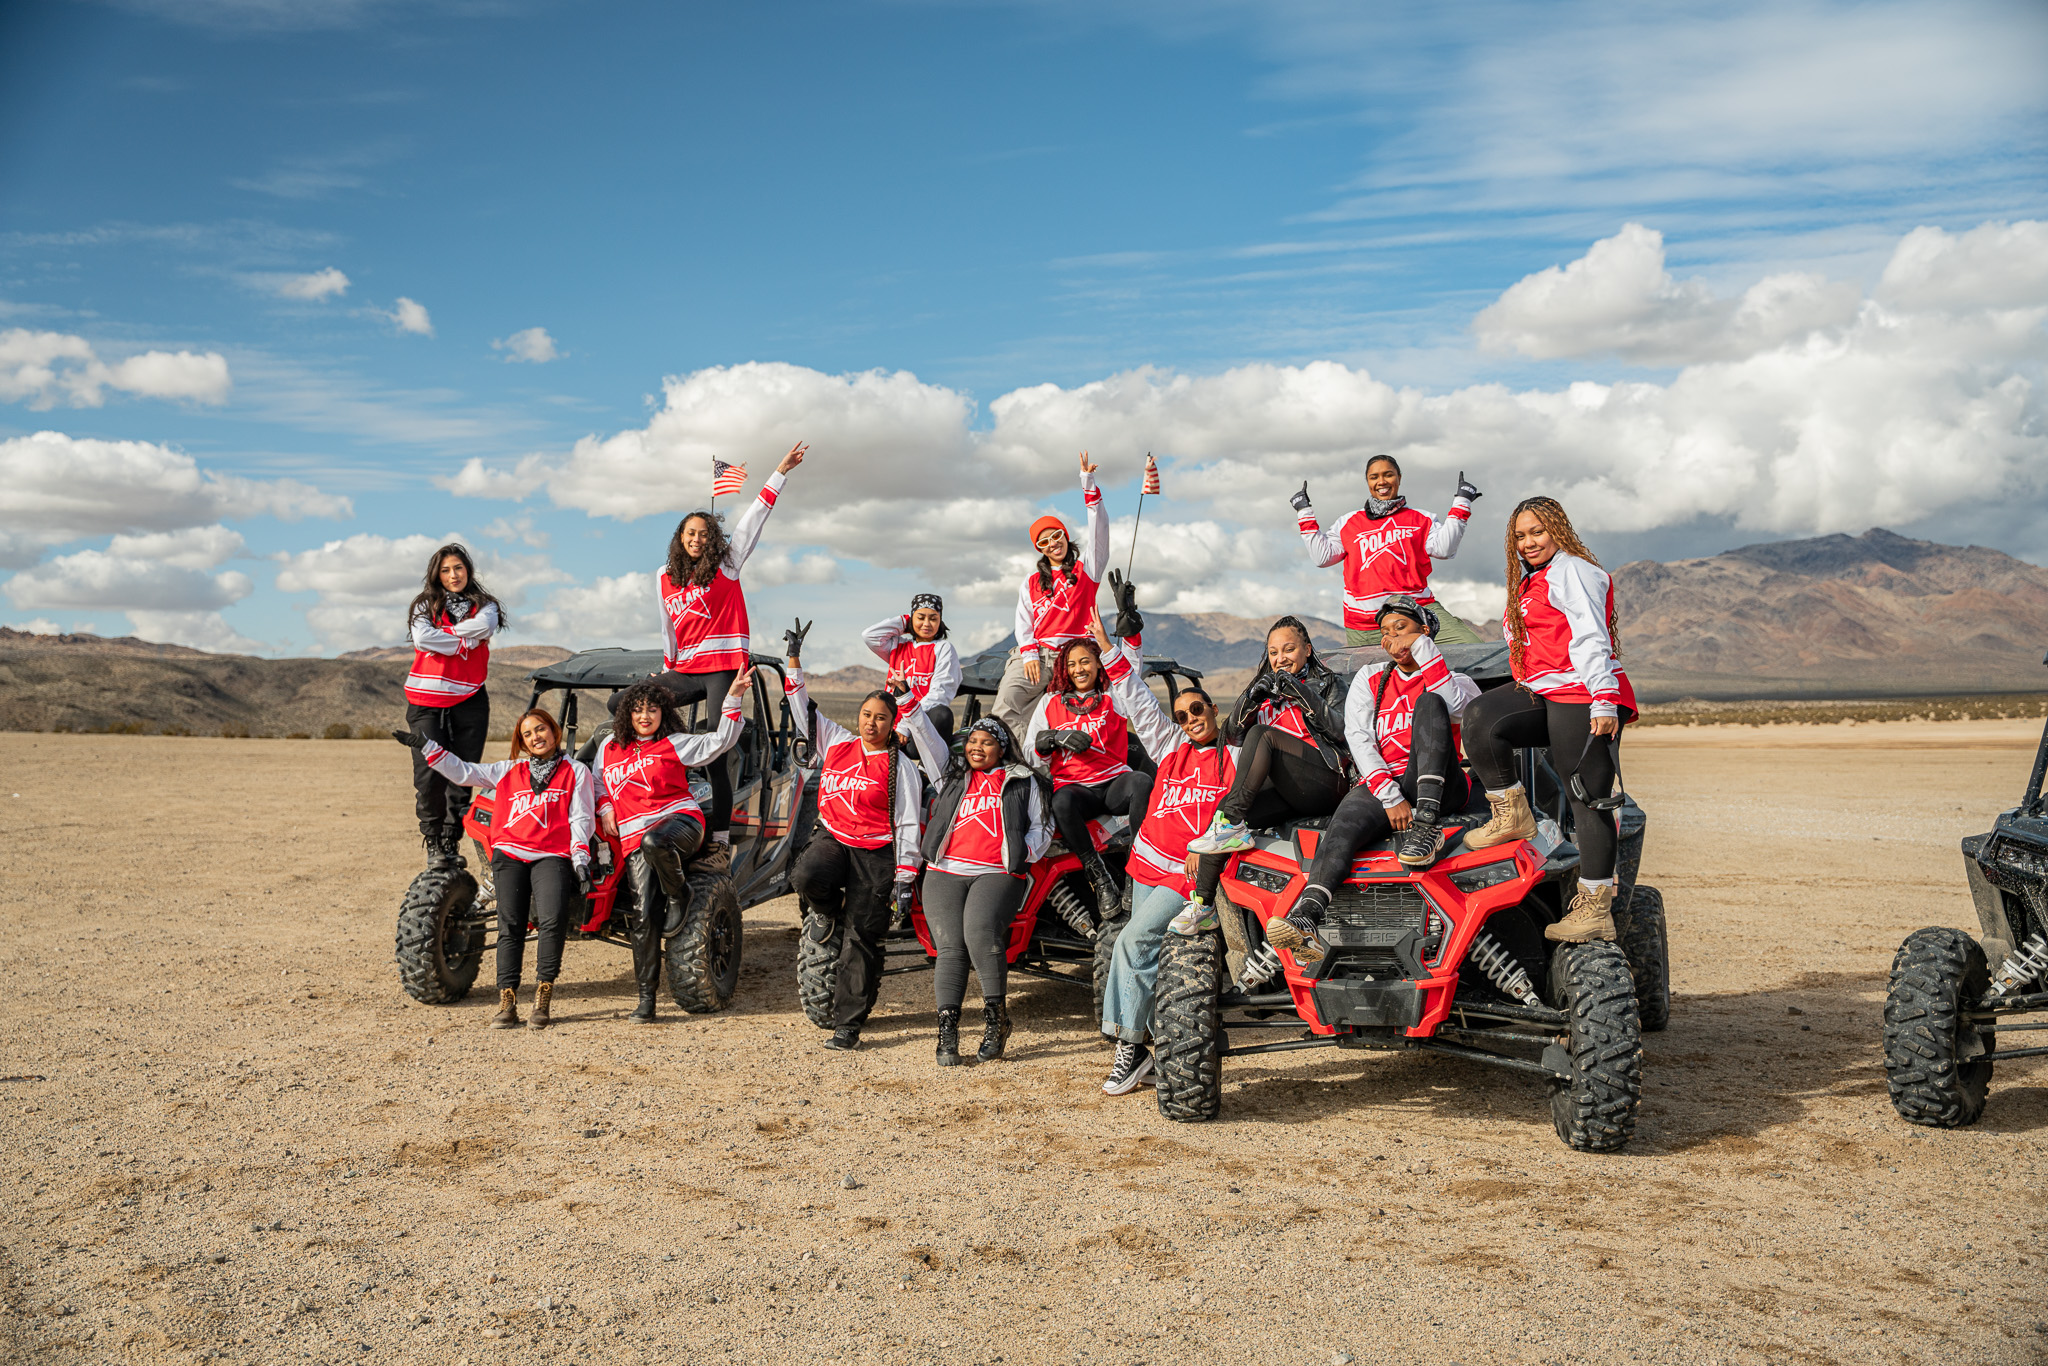 Polaris Sets Out To Champion Diversity By Empowering Black Women To Explore Powersports